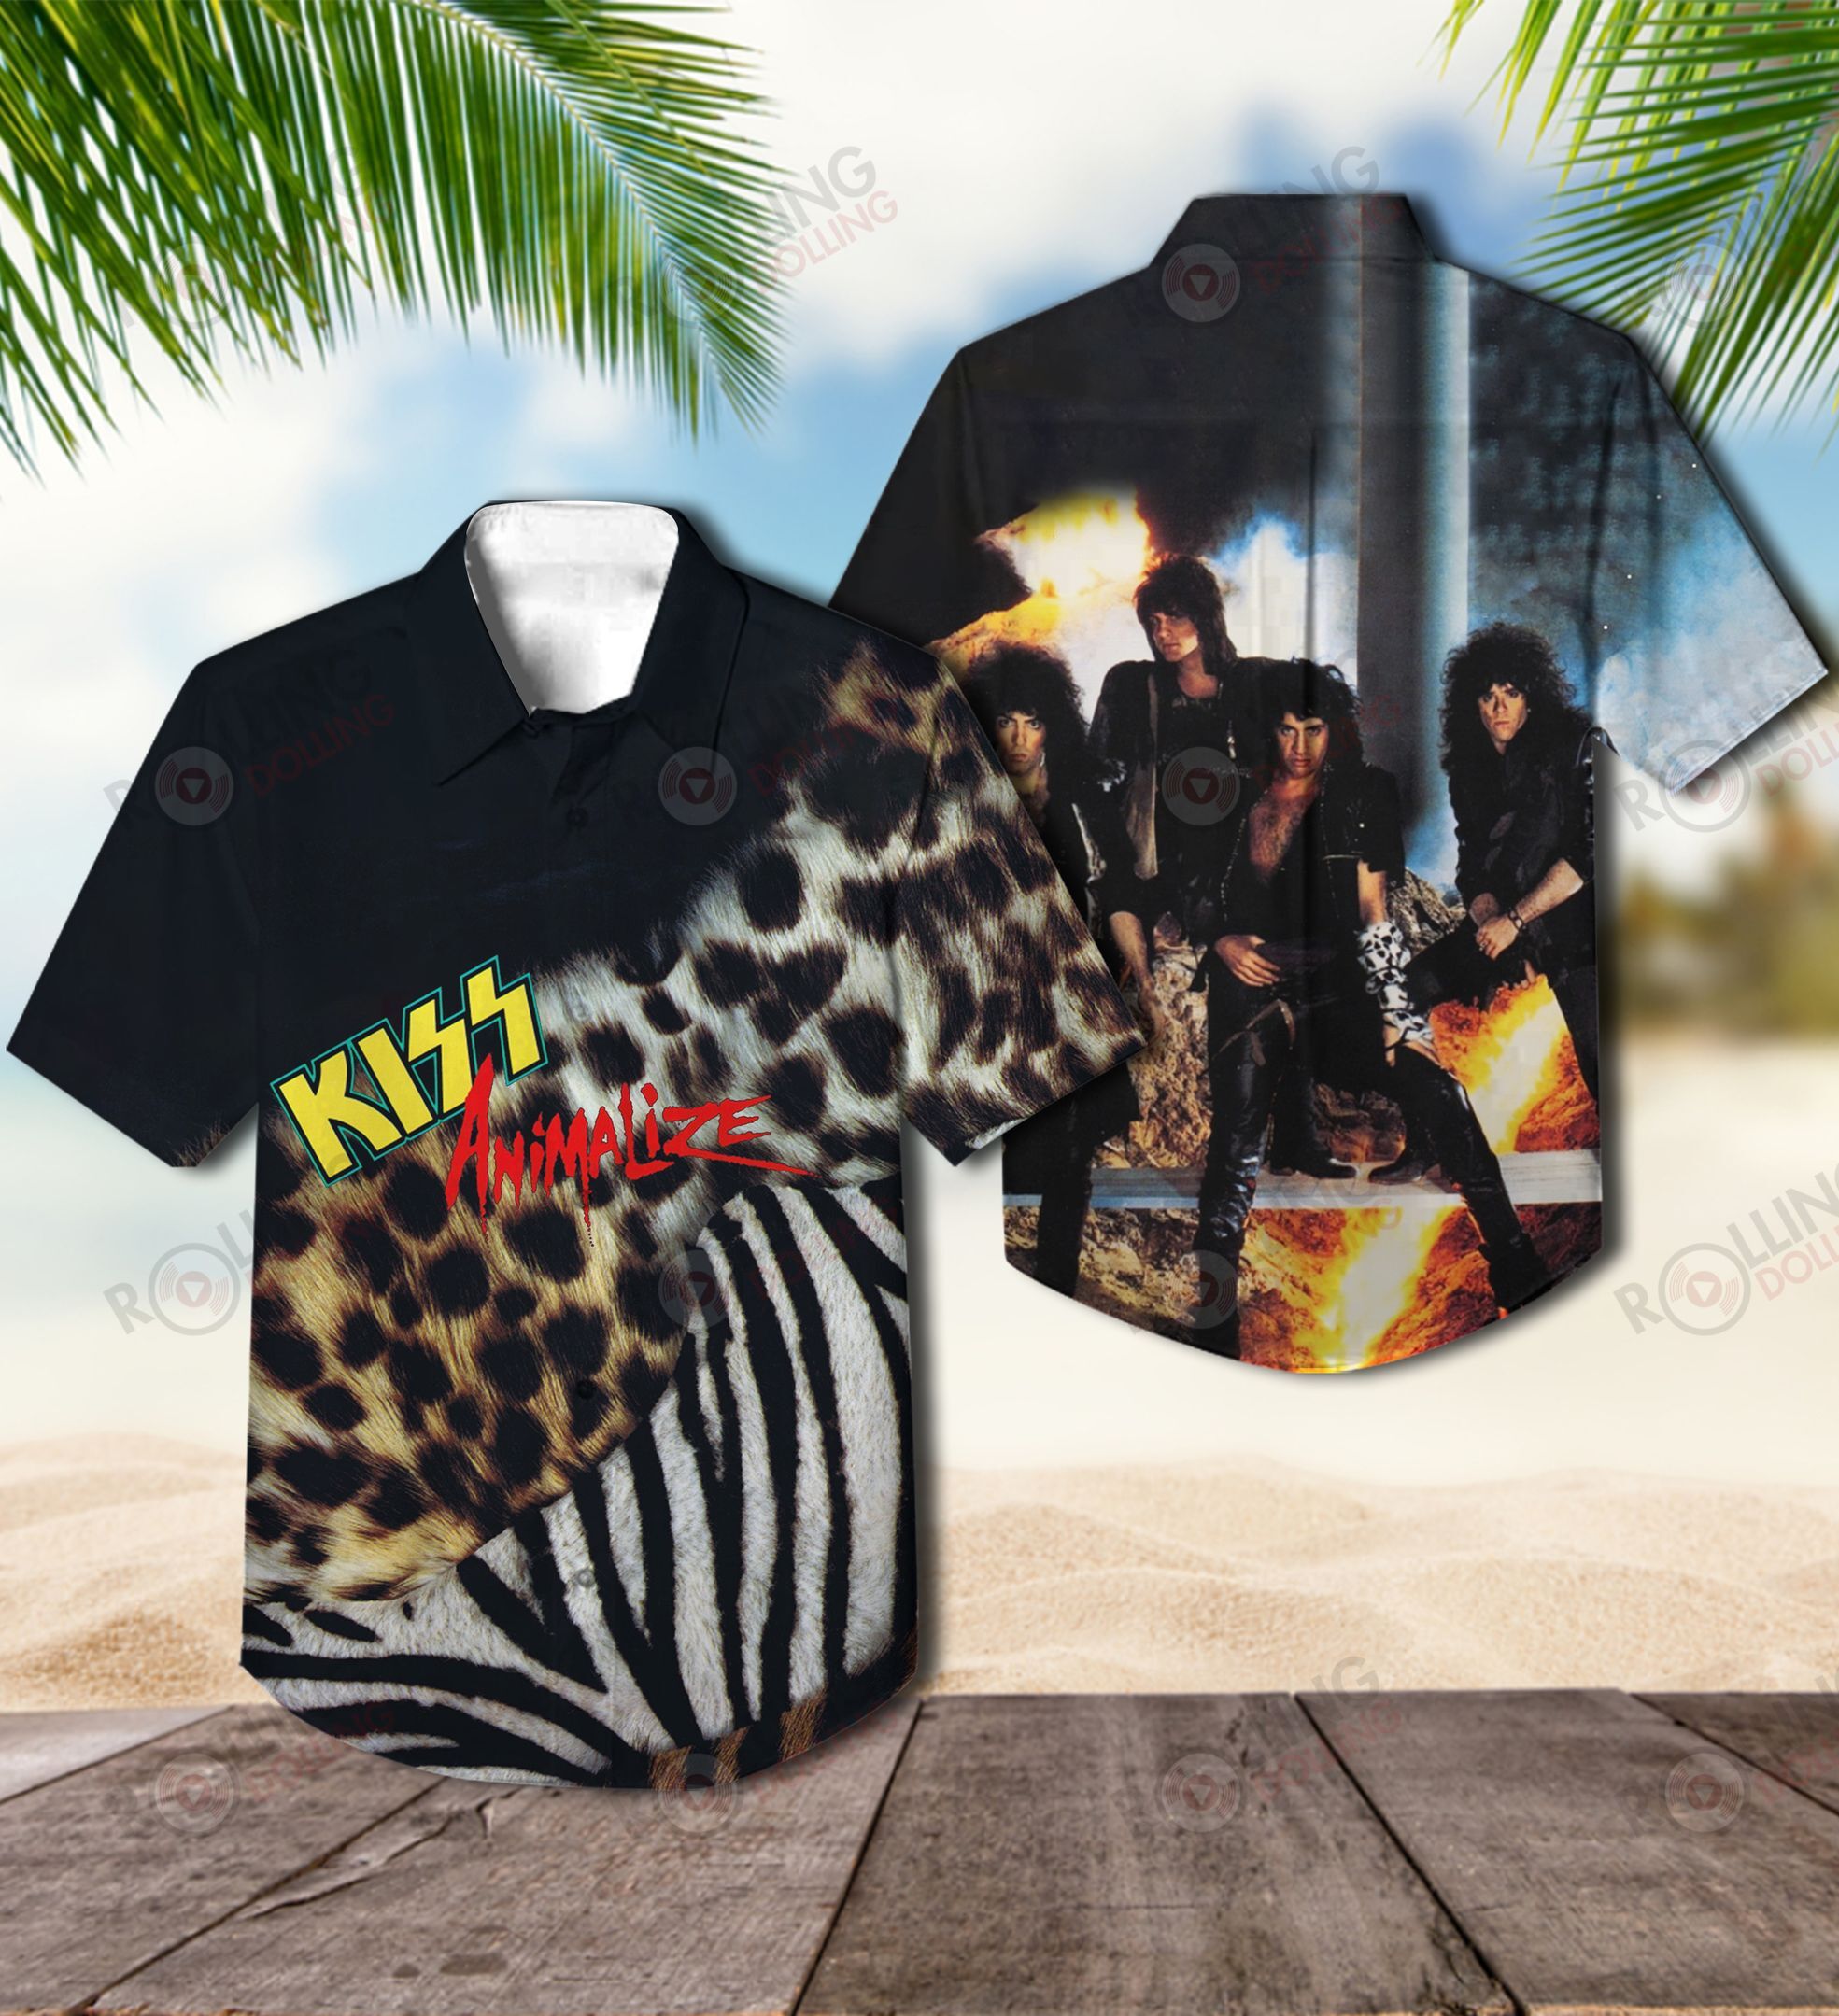 For summer, consider wearing This Amazing Hawaiian Shirt shirt in our store 168